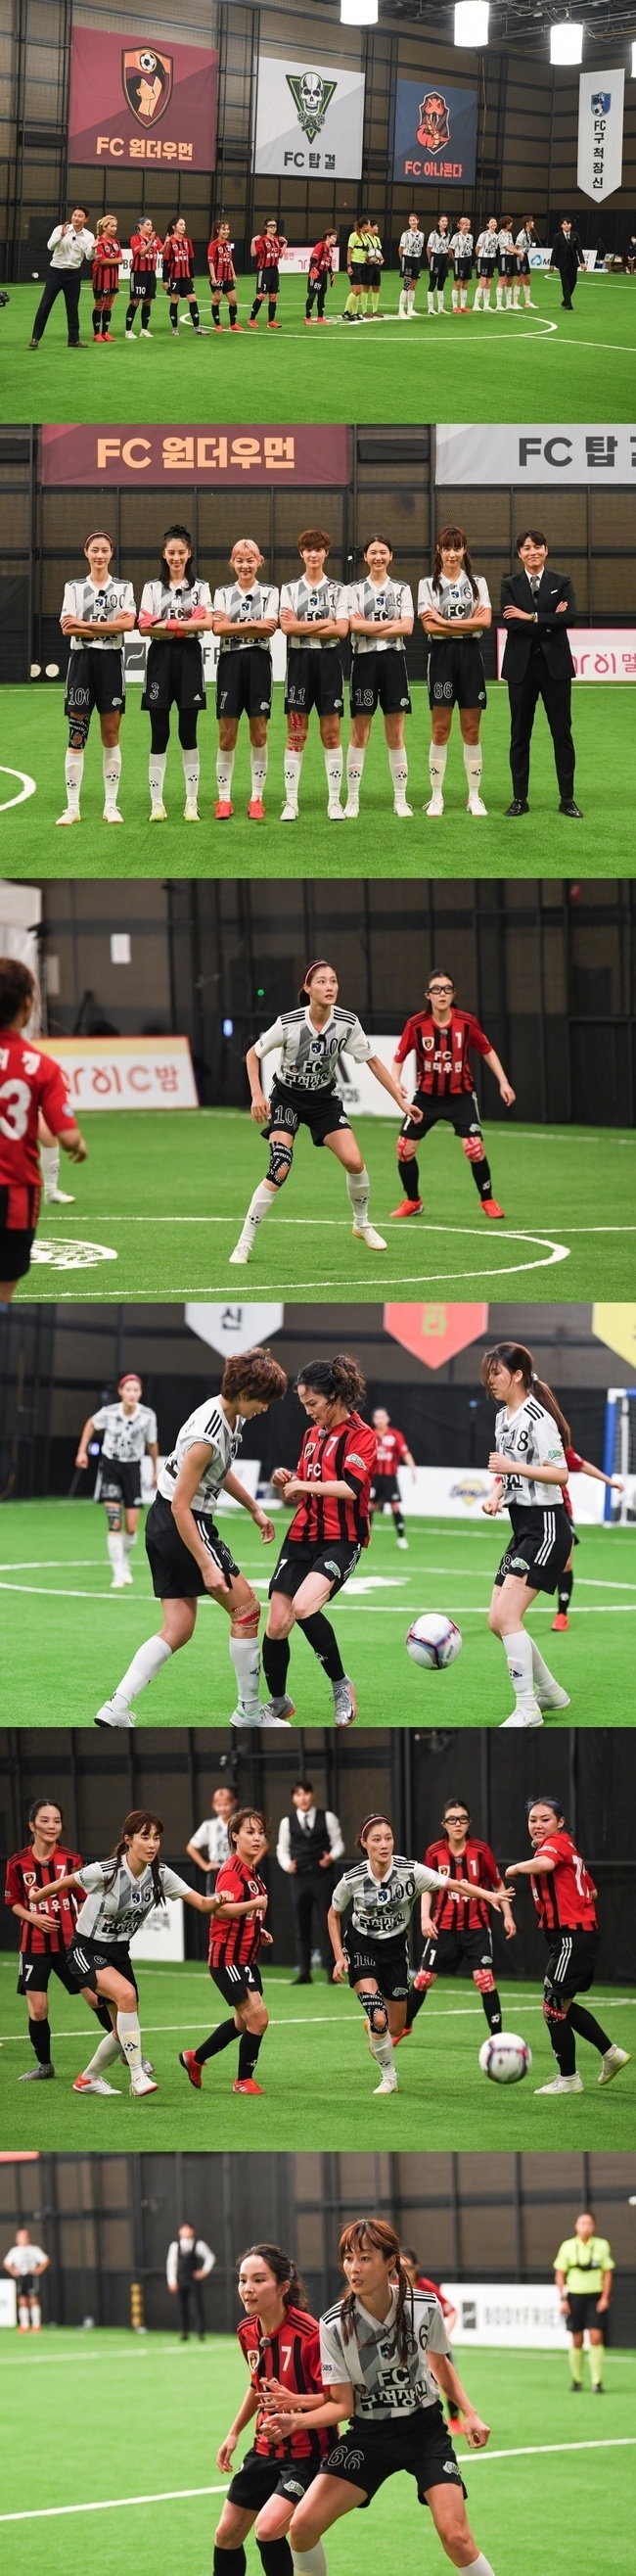 SBS entertainment Kick a goal side admits Falsify, and criticism for sports caster Bae Seong-jae is also pouring.Among them, the criticism of FC Wonder Woman Park is also reversed, and the disappointment and anger of viewers are infested.SBS Kick a goal (hereinafter referred to as Goal Girl) broadcast on the 22nd was caught up in the Falsify controversy.Some netizens raised the Falsify theory because of the location of the performers and the 5 to 0 scoreboard captured in the corner of the screen.Today (24 Days) Golden Girl acknowledged Falsify, saying, I sincerely apologize for the confusion to viewers by changing some of the editing order during the broadcast process.Even if the results of the Kyonggi and the final score so far are not different from the contents of the broadcast, some of the edits were broadcast differently from the actual time order.It was the result of the complacency of our production team, and I realized that the authenticity of the sport is much more important than pursuing entertainment fun. However, viewers who were impressed by fair sportsmanship are disappointed with the controversy.Especially, this Falsify controversy has raised suspicions that he was involved in Falsify for the actual sports caster, Bae Seong-jae.This is because the two teams did not aim for the first half, but as Kyonggi originally stated, FC Guchuk Jangsin led Kyonggi with overwhelming skill difference from the first half, so the commentary team mentioned 3:1, 3:2 Score can not come out.In the end, the suspicion that it was recorded by Hushi was put on weight, especially the audiences fierce eyes toward professional sports caster Bae Seong-jae.The production team said in a second apology, It was a problem that took place entirely in the editing process of the director regardless of the cast and the hosts who did the Do best in the field, and the two of the hosts, Bae Seong-jae and Lee Soo-geun, Falsify denied any involvement in the incident.However, the commentary did not explain the details of the mention of Score, which was not seen in the actual Kyonggi, such as Wonder Woman is chasing FC Guchukjang 4 to 3, so the suspicion of post-recording is not turned off.In addition, FC Wonder Woman was pointed out that Park Sung-ki, who had to endure the SNS attack, became a victim of this Falsify as he became a principal who missed the victory.It was revealed that it was a one-sided Kyonggi from the first half, not a tight game, and there is a voice saying that it is sad toward Park.In addition to the turn, the scenes that had the Falsify situation from season 1 are being reexamined.For this reason, some people are suspicious of releasing all the unedited Kyonggi copies.The public opinion that the viewers deceitful Falsify broadcast should be abolished is expected to be a big blow to the Falsify controversy.